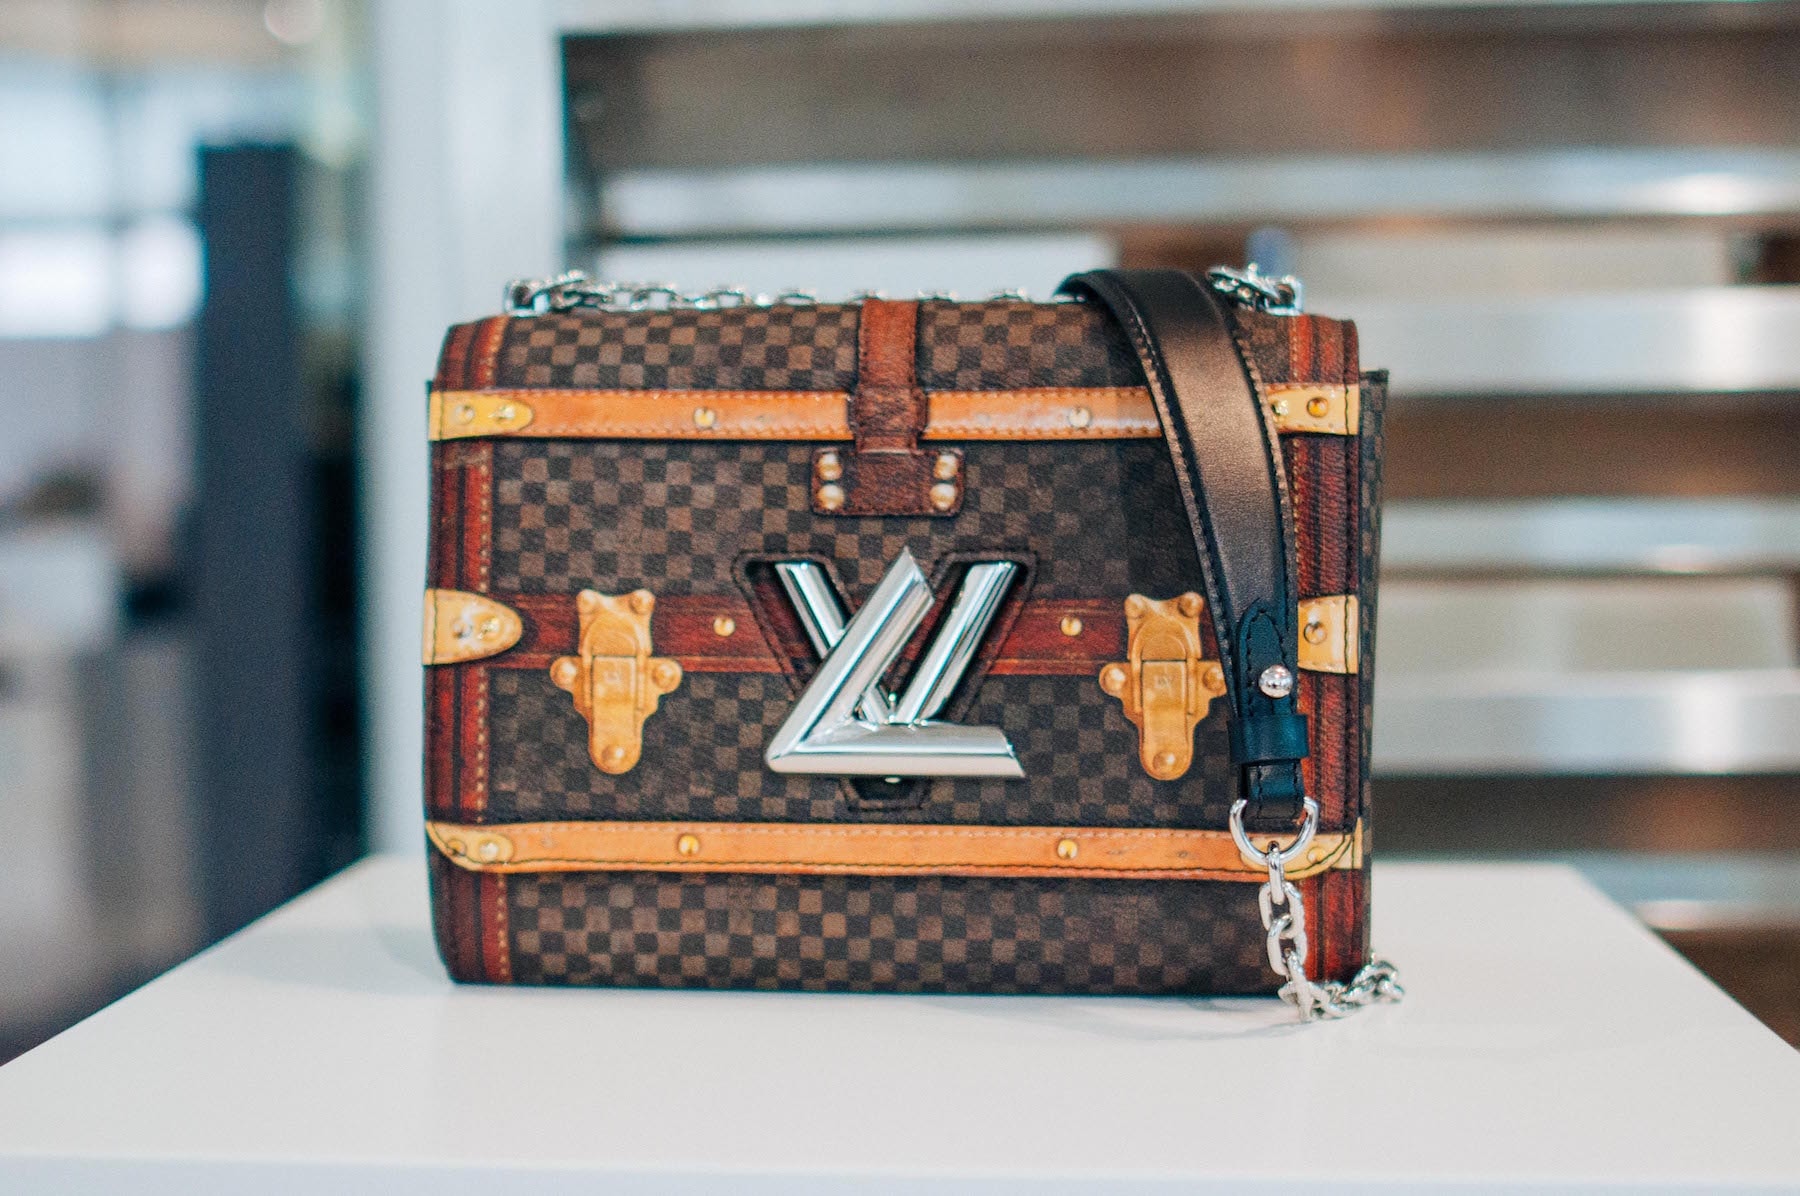 Louis Vuitton Fall/Winter 18 Collection Preview Nicholas Ghesquiere Kim Jones LV Monogram Alma Bag Carry All Jewelry